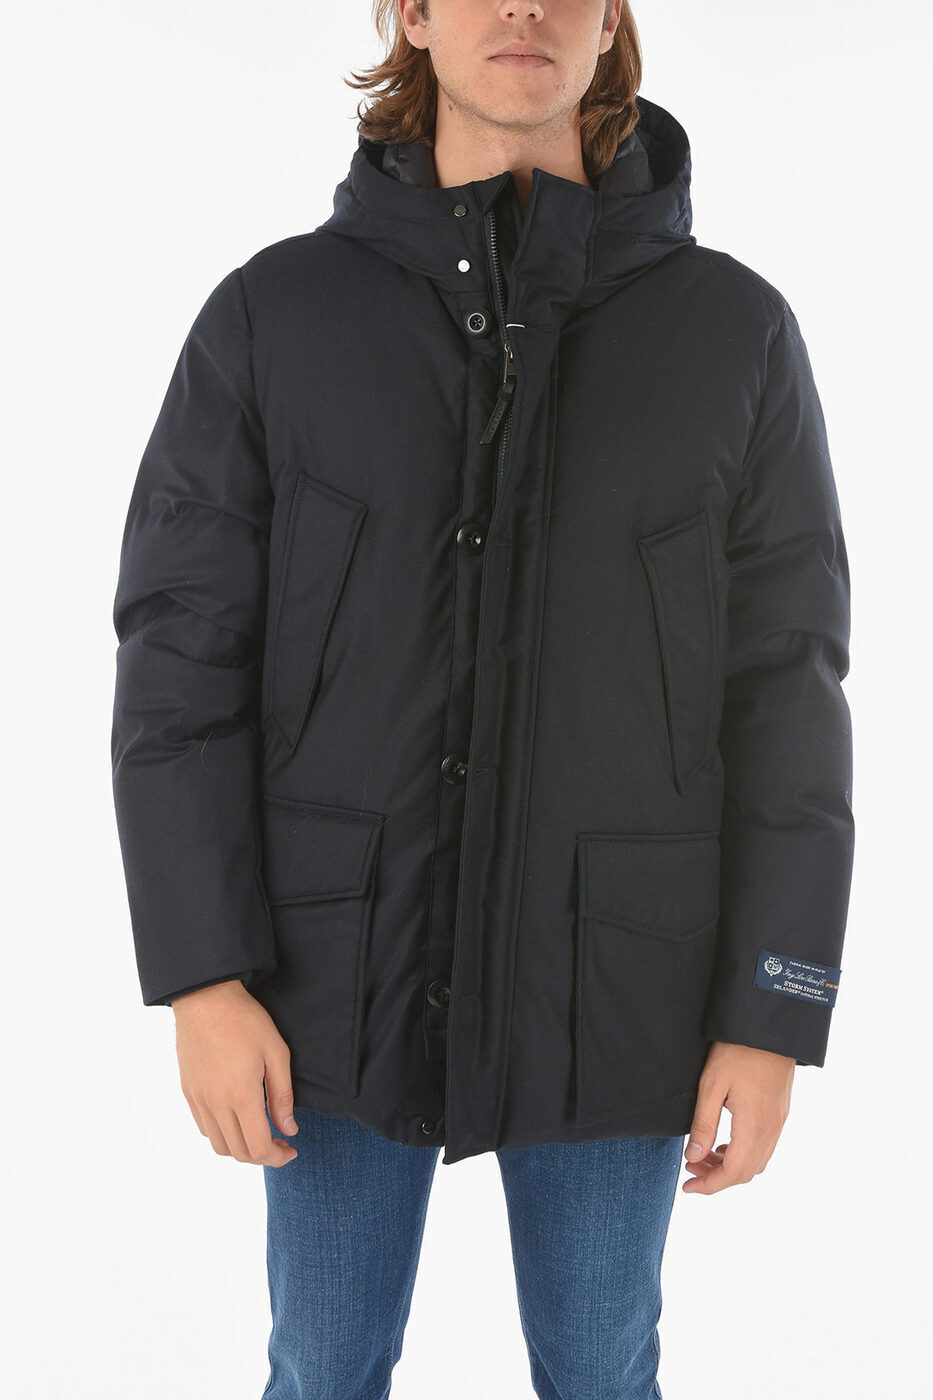 WOOLRICH ウールリッチ ジャケット CFWOOU0267MRUT2347 3989 メンズ VIRGIN WOOL 4 POCKETS LP MOUNTAIN DOWN JACKET WITH FRONT CLO 【関税・送料無料】【ラッピング無料】 dk